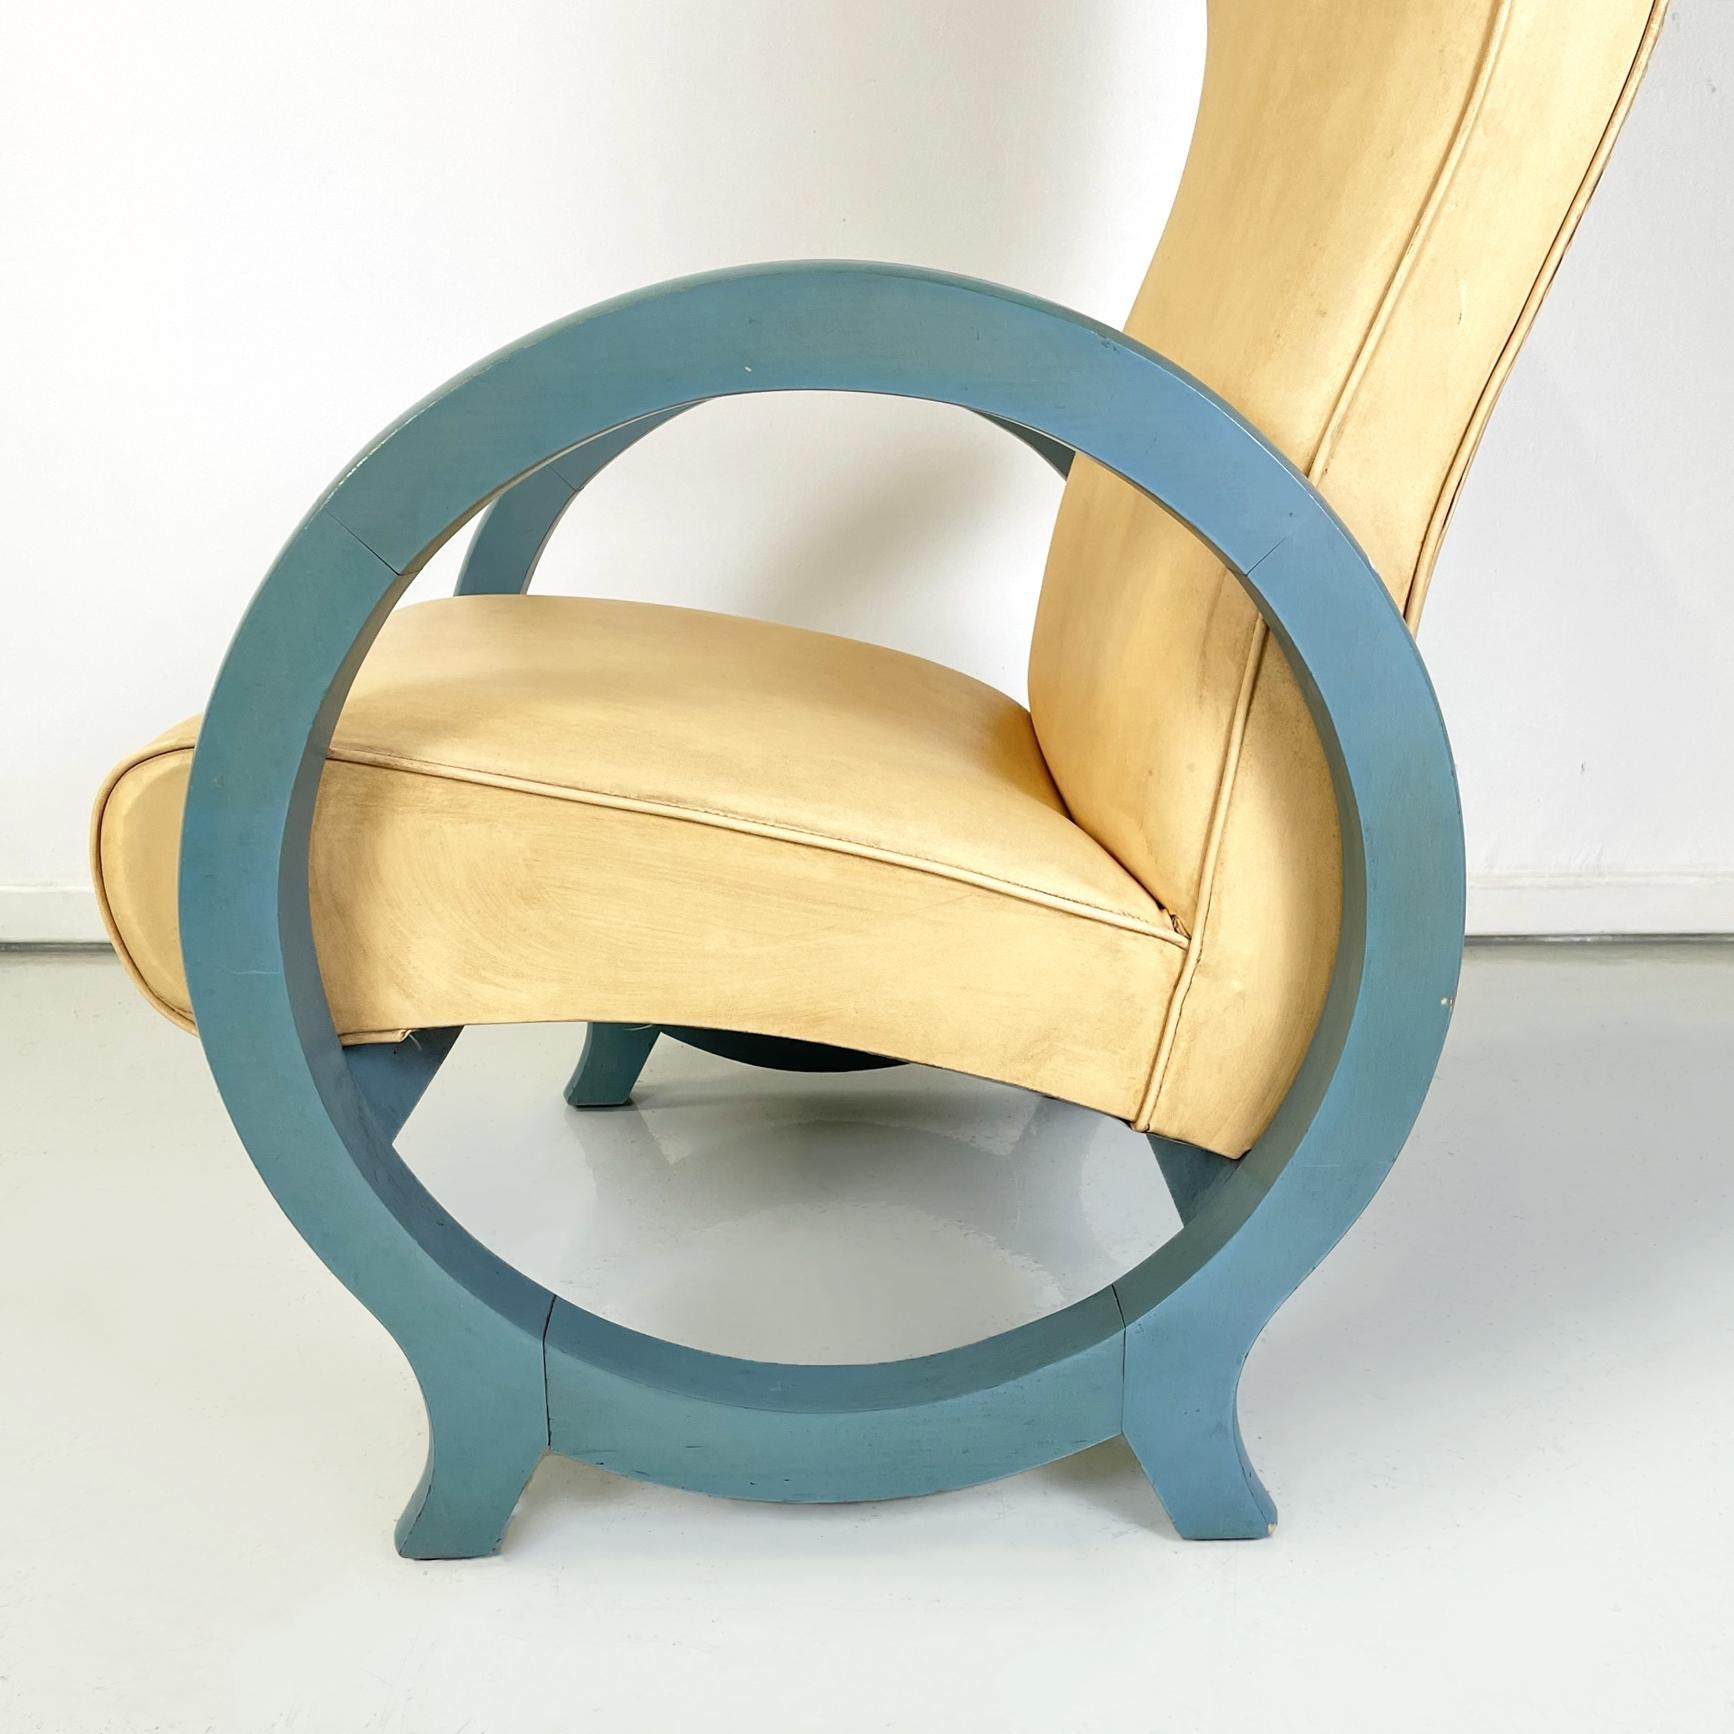 Italian Modern Armchair in Beige Leather and Light Blue Wood, 1980s For Sale 8